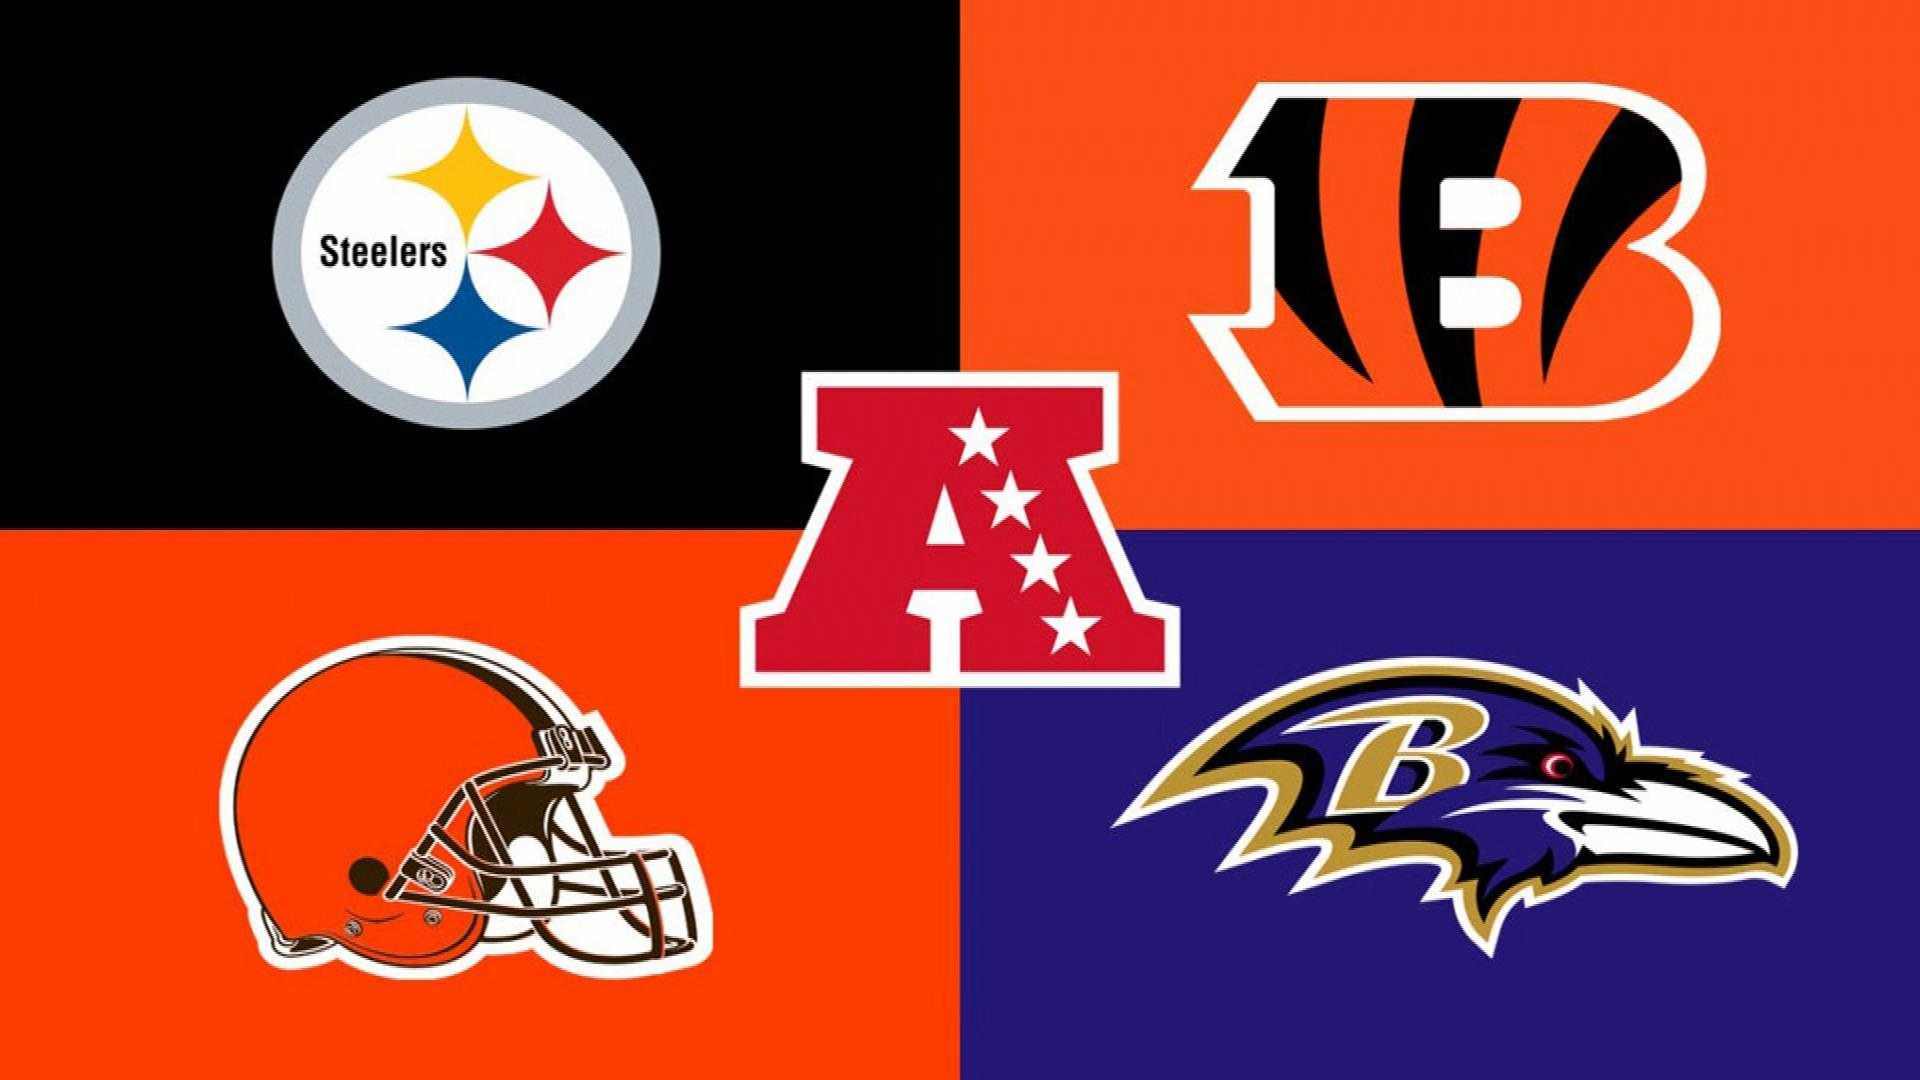  AFC North 2020: NFL Analysis and Predictions